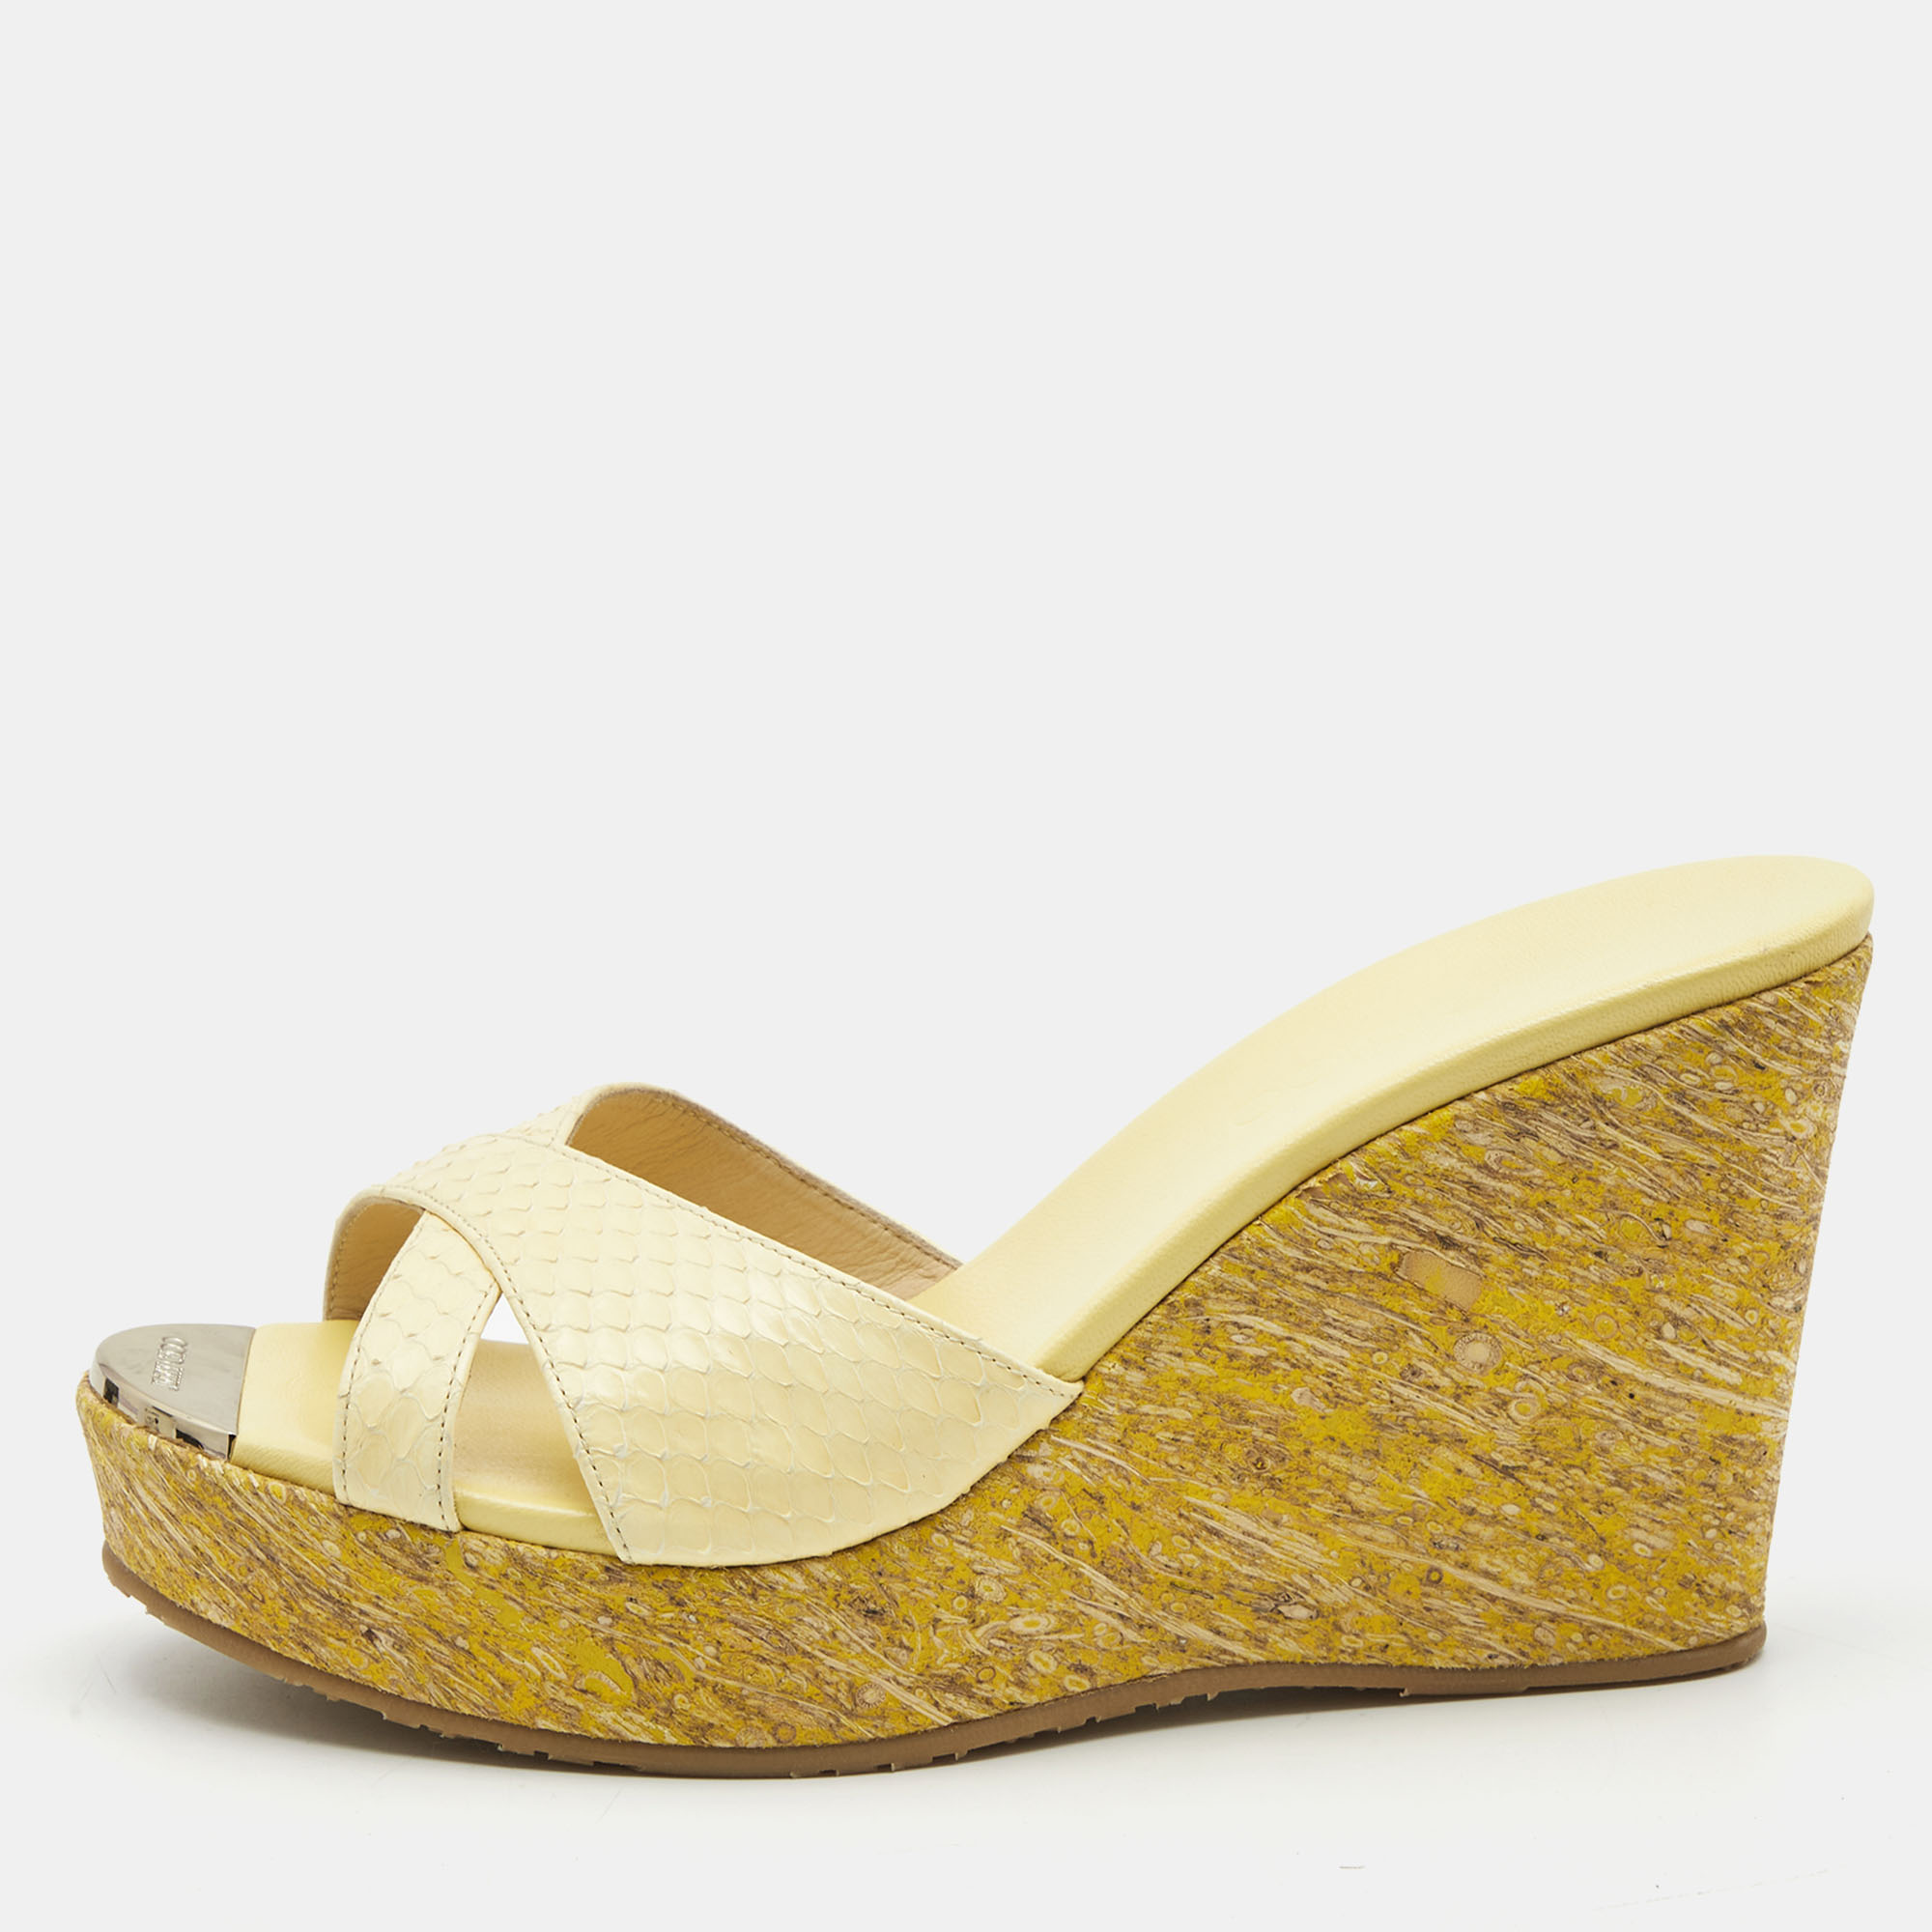 Pre-owned Jimmy Choo Yellow Python Leather Prima Wedge Sandals Size 38.5